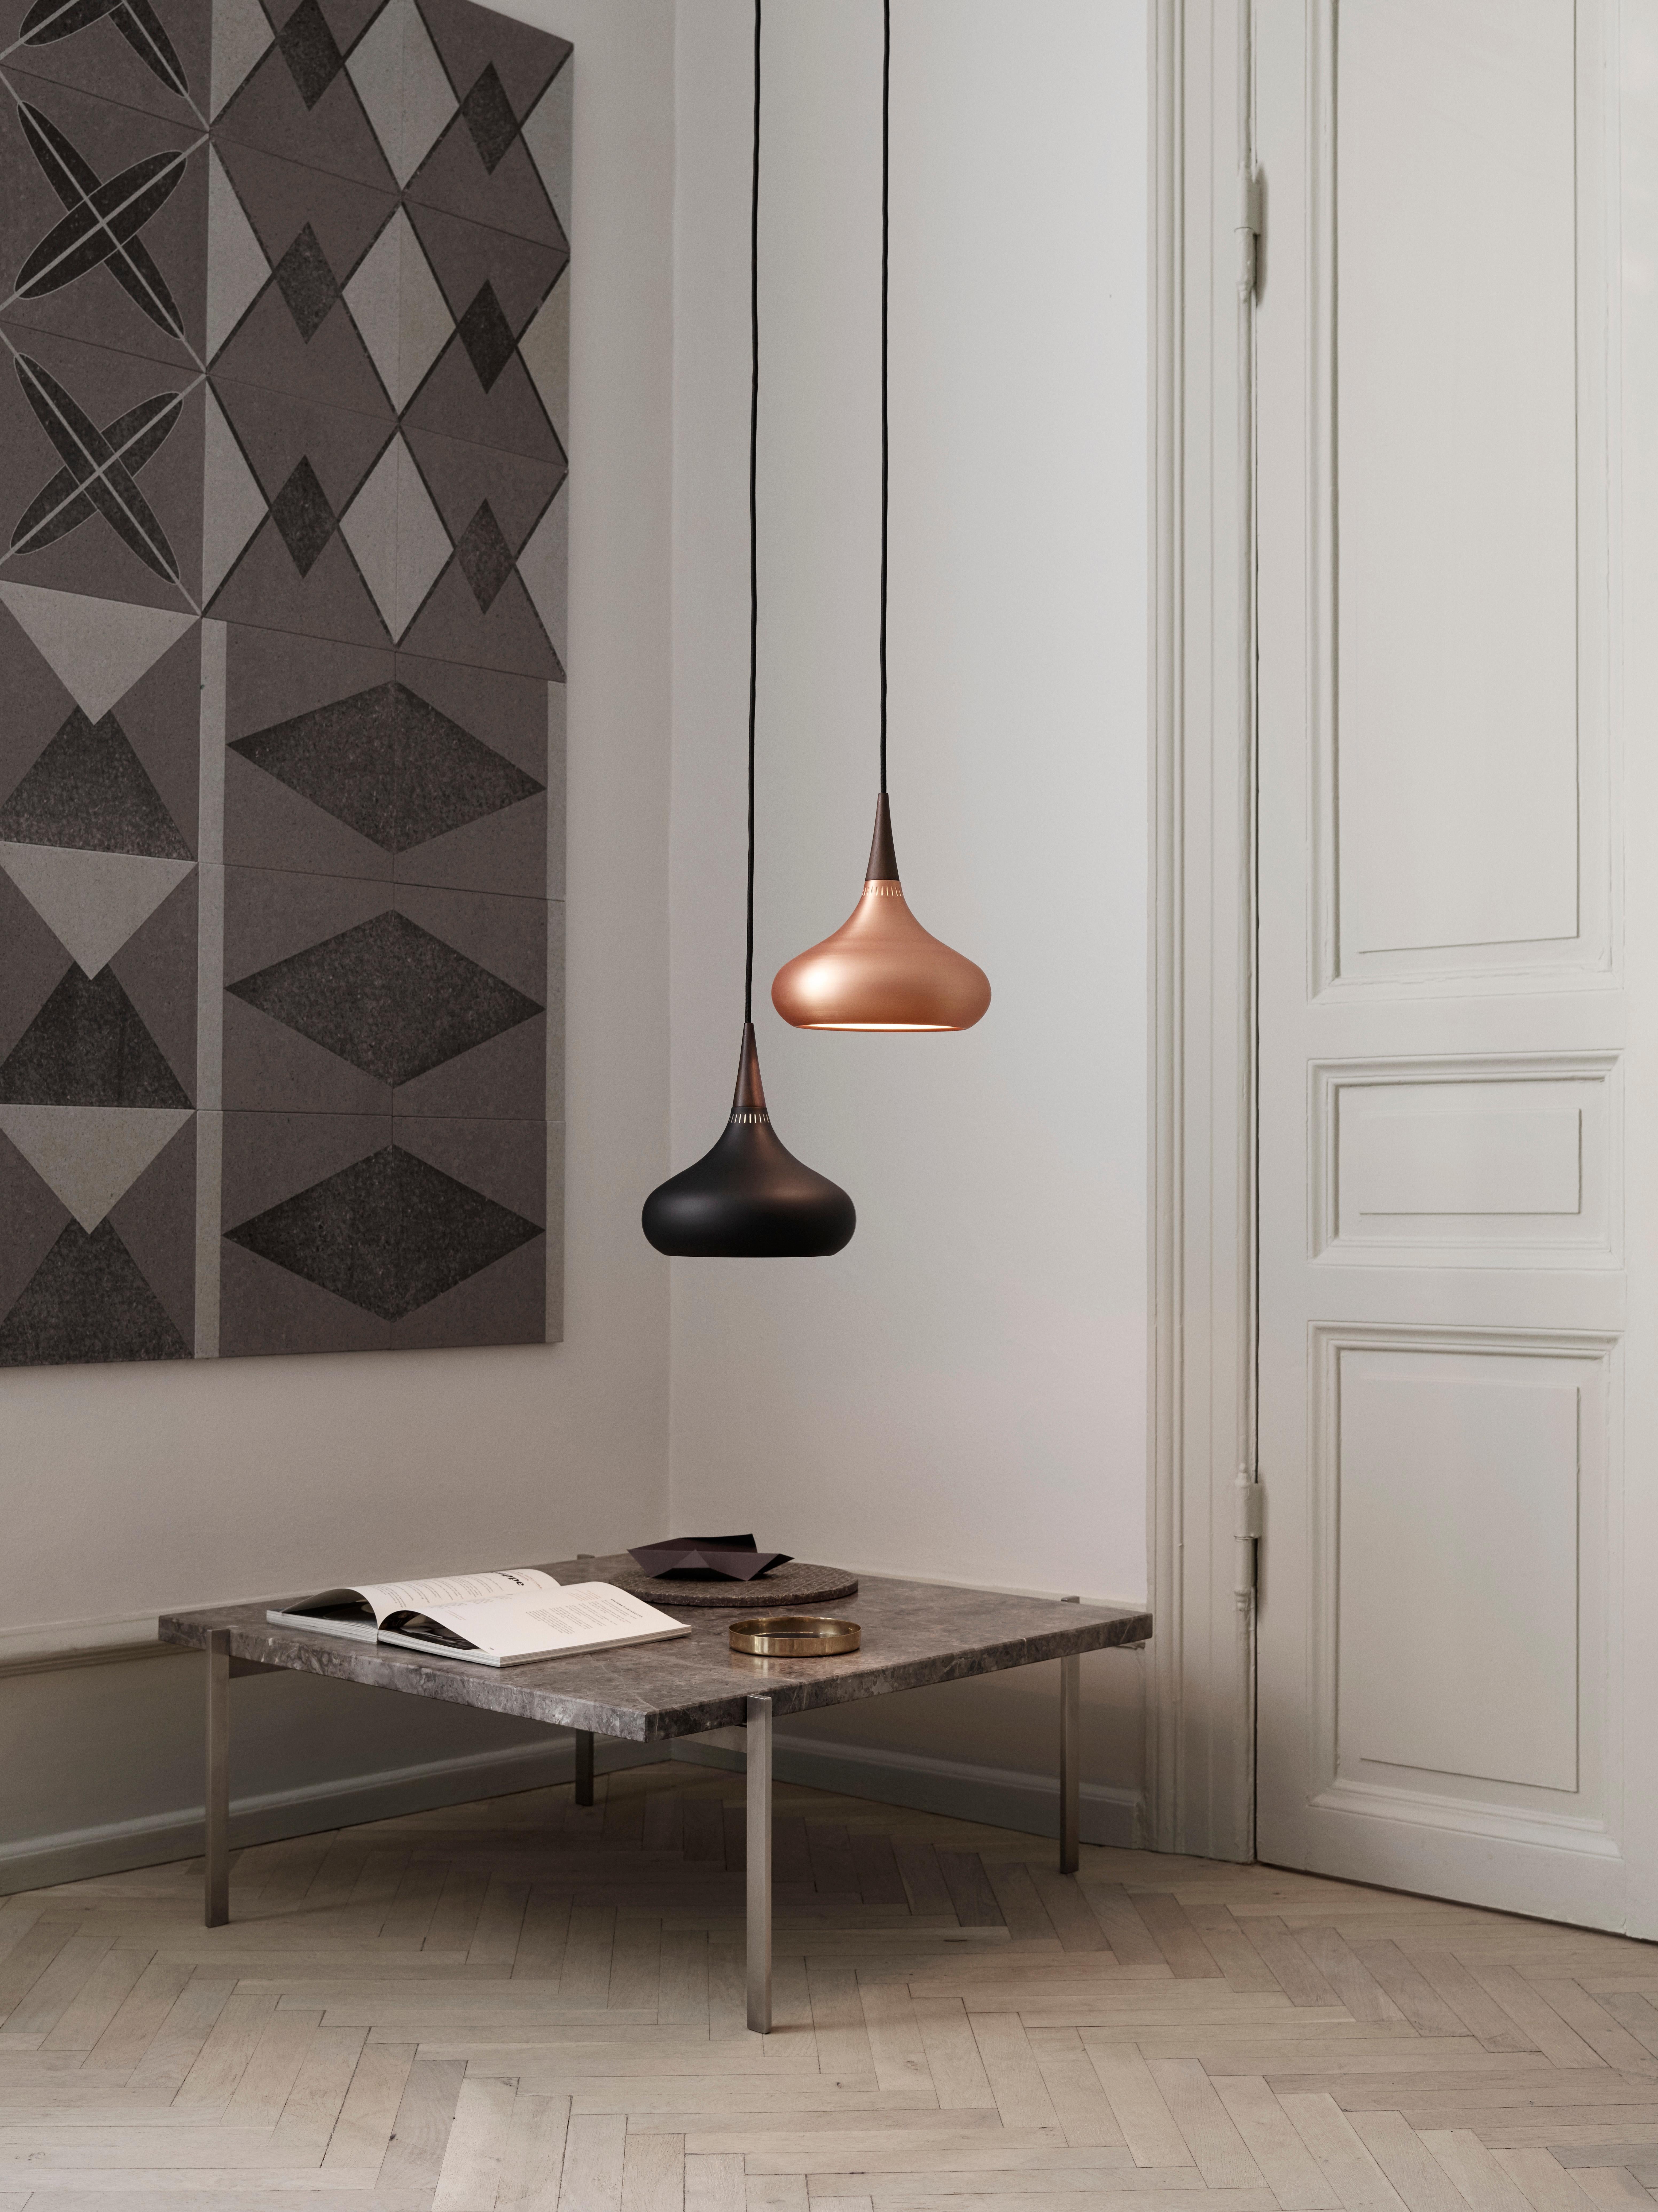 Small Jo Hammerborg 'Orient' Pendant Lamp for Fritz Hansen in Black and Rosewood.

Established in 1872, Fritz Hansen has become synonymous with legendary Danish design. Combining timeless craftsmanship with an emphasis on sustainability, the brand’s